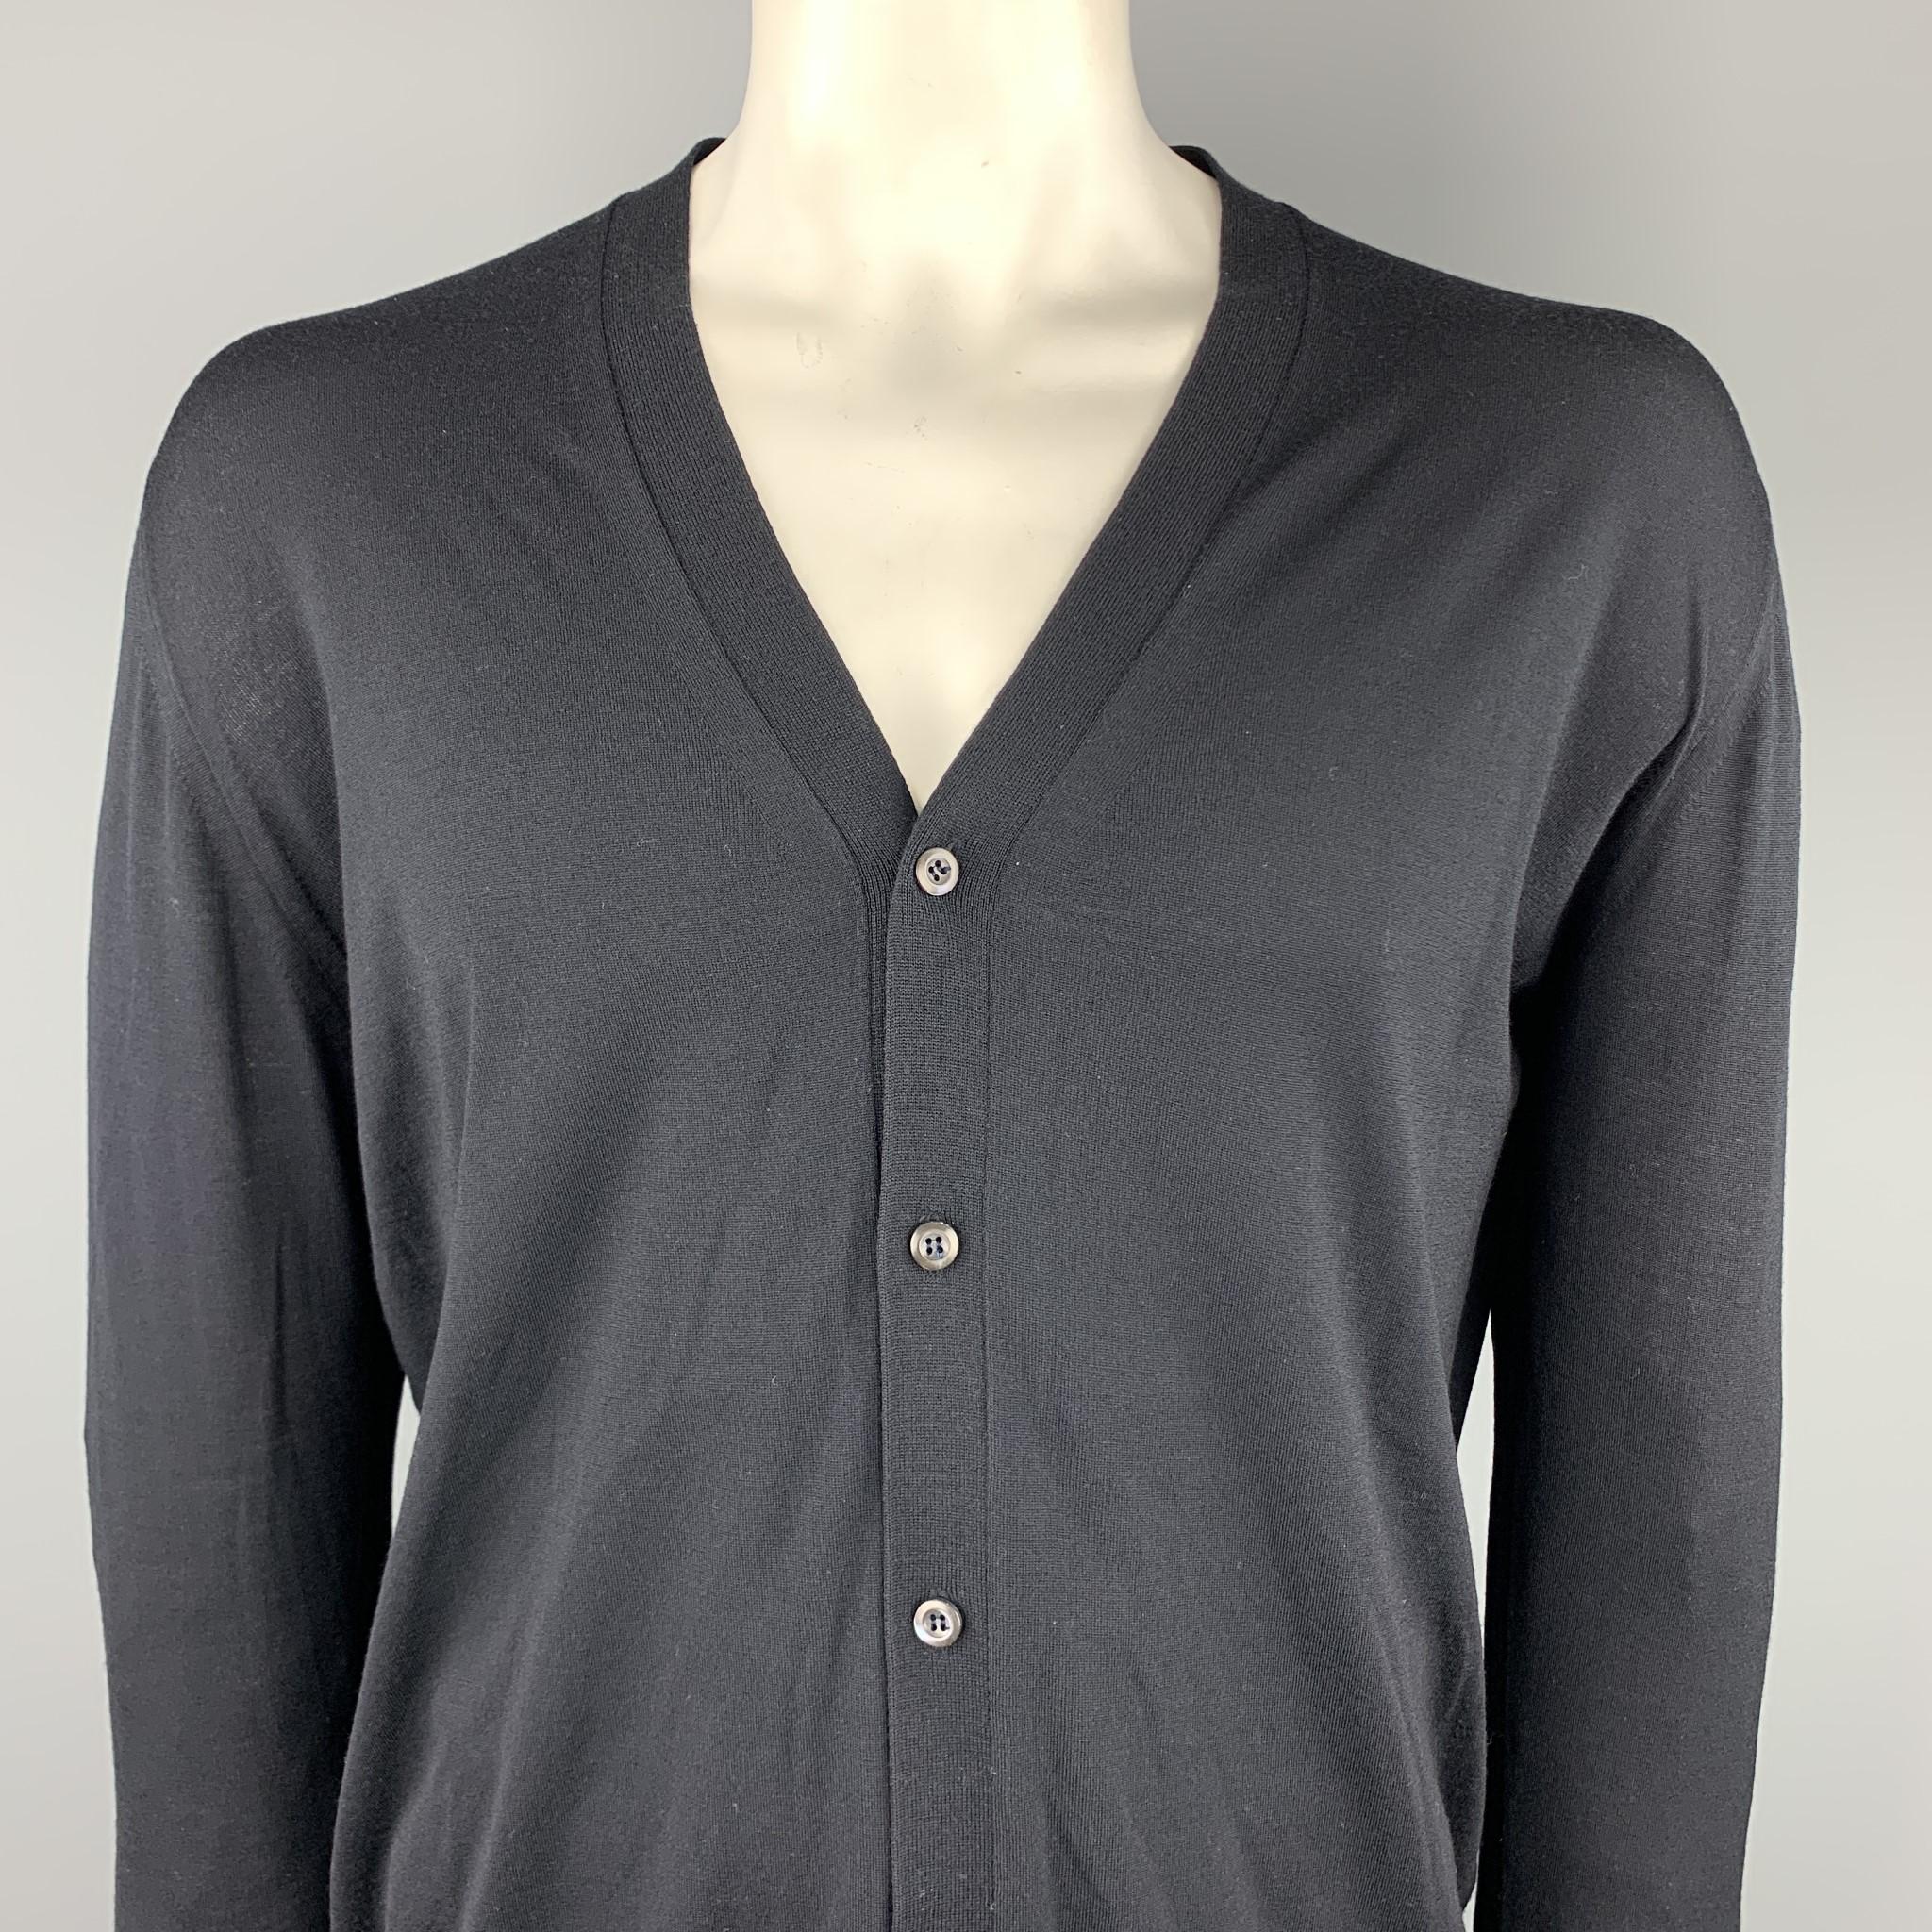 PRADA cardigan comes in a black wool featuring a buttoned closure. Made in Italy

Excellent Pre-Owned Condition.
Marked: IT 56

Measurements:

Shoulder: 16.5 in. 
Chest: 46 in.
Sleeve: 26.5 in. 
Length: 28 in. 